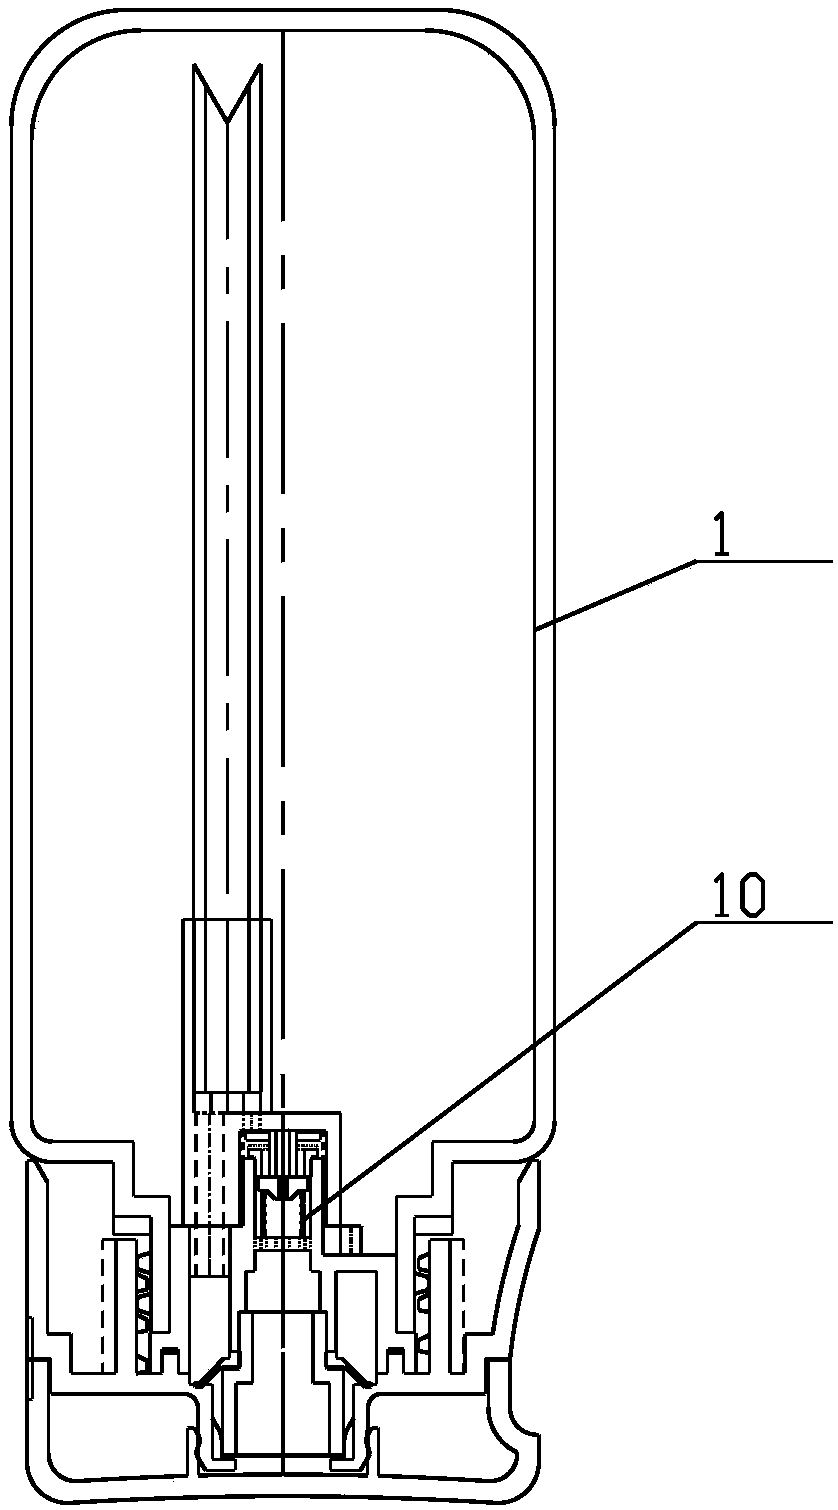 Inverted type extruding foam pump